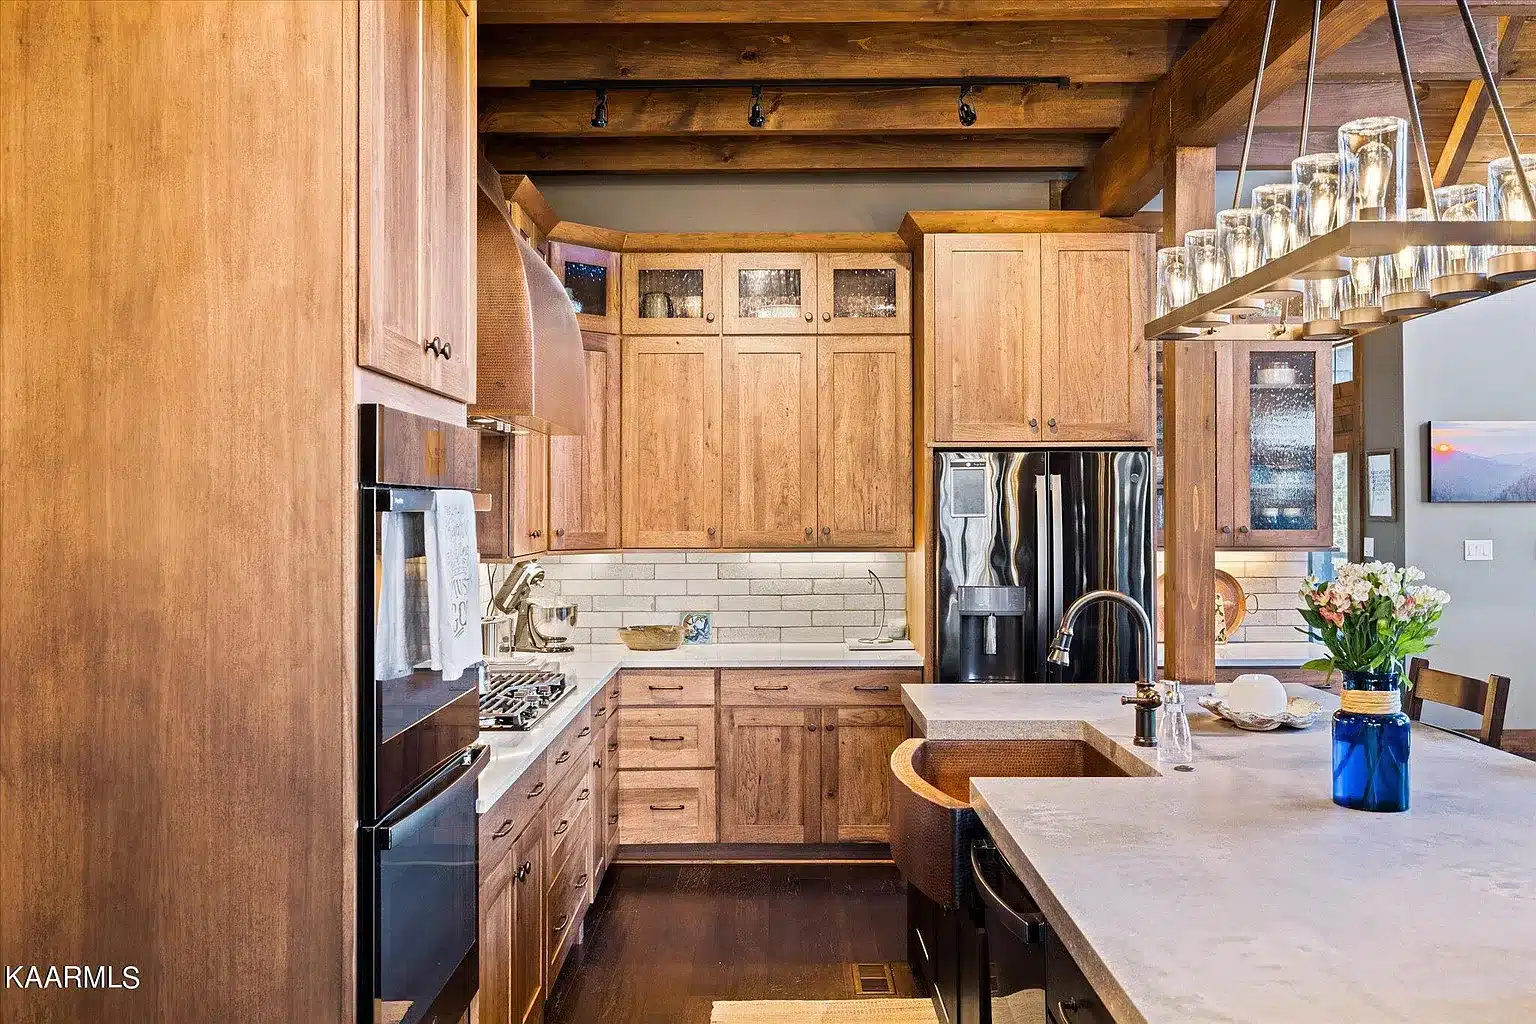 Rustic Kitchen with double oven, gas range and transom windows over upper cabinets and tile backsplash. The curved front copper sink makes a nice addition